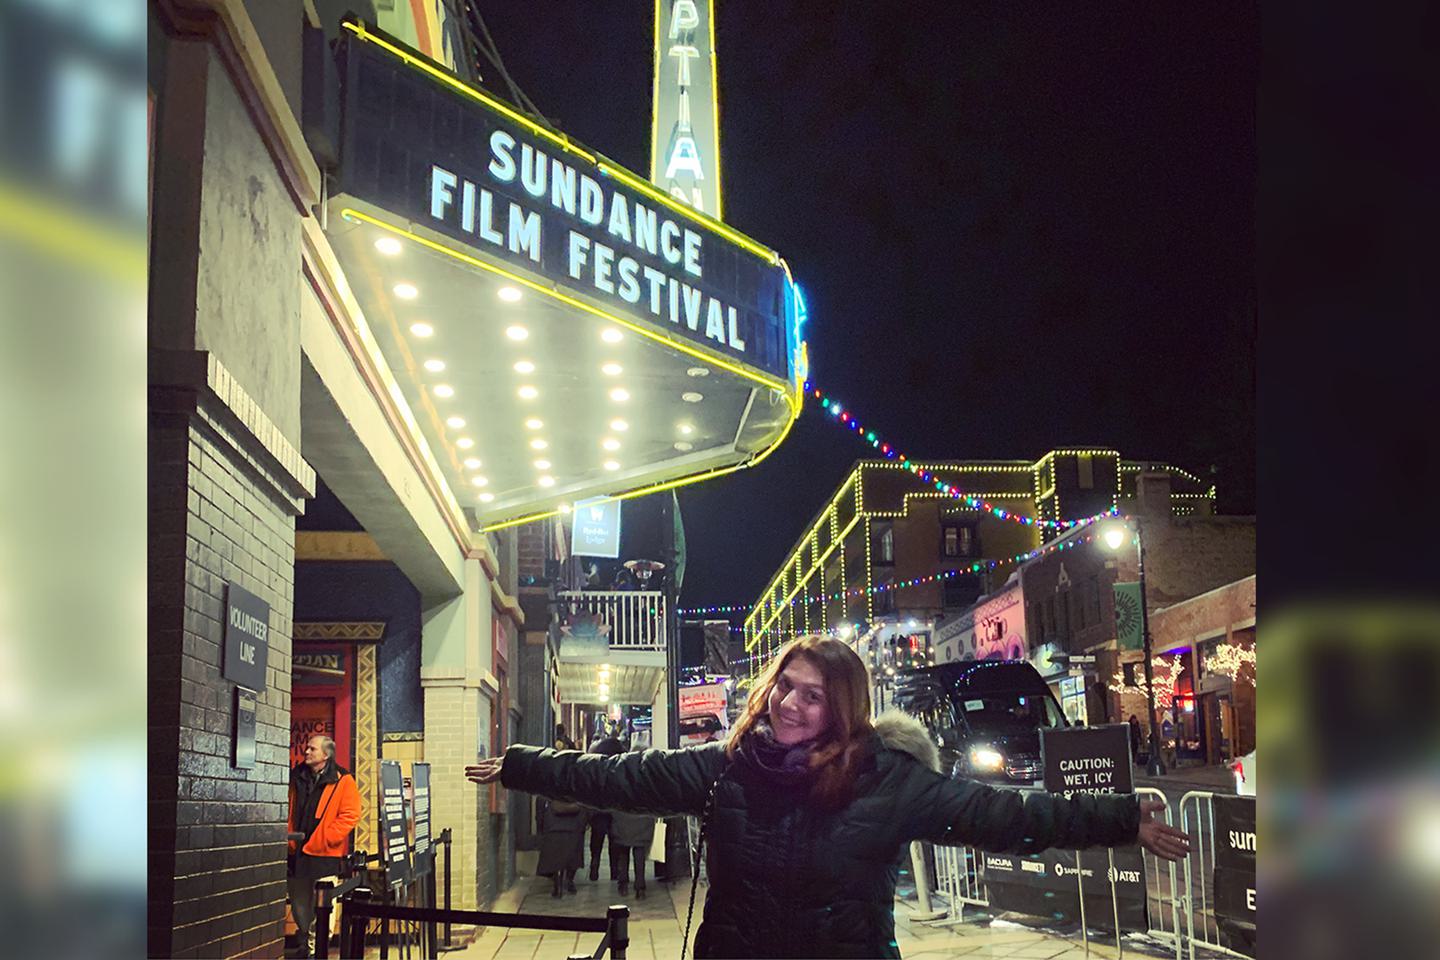 Claire Ayoub stands outside a Sundance sign with her arms outstretched.